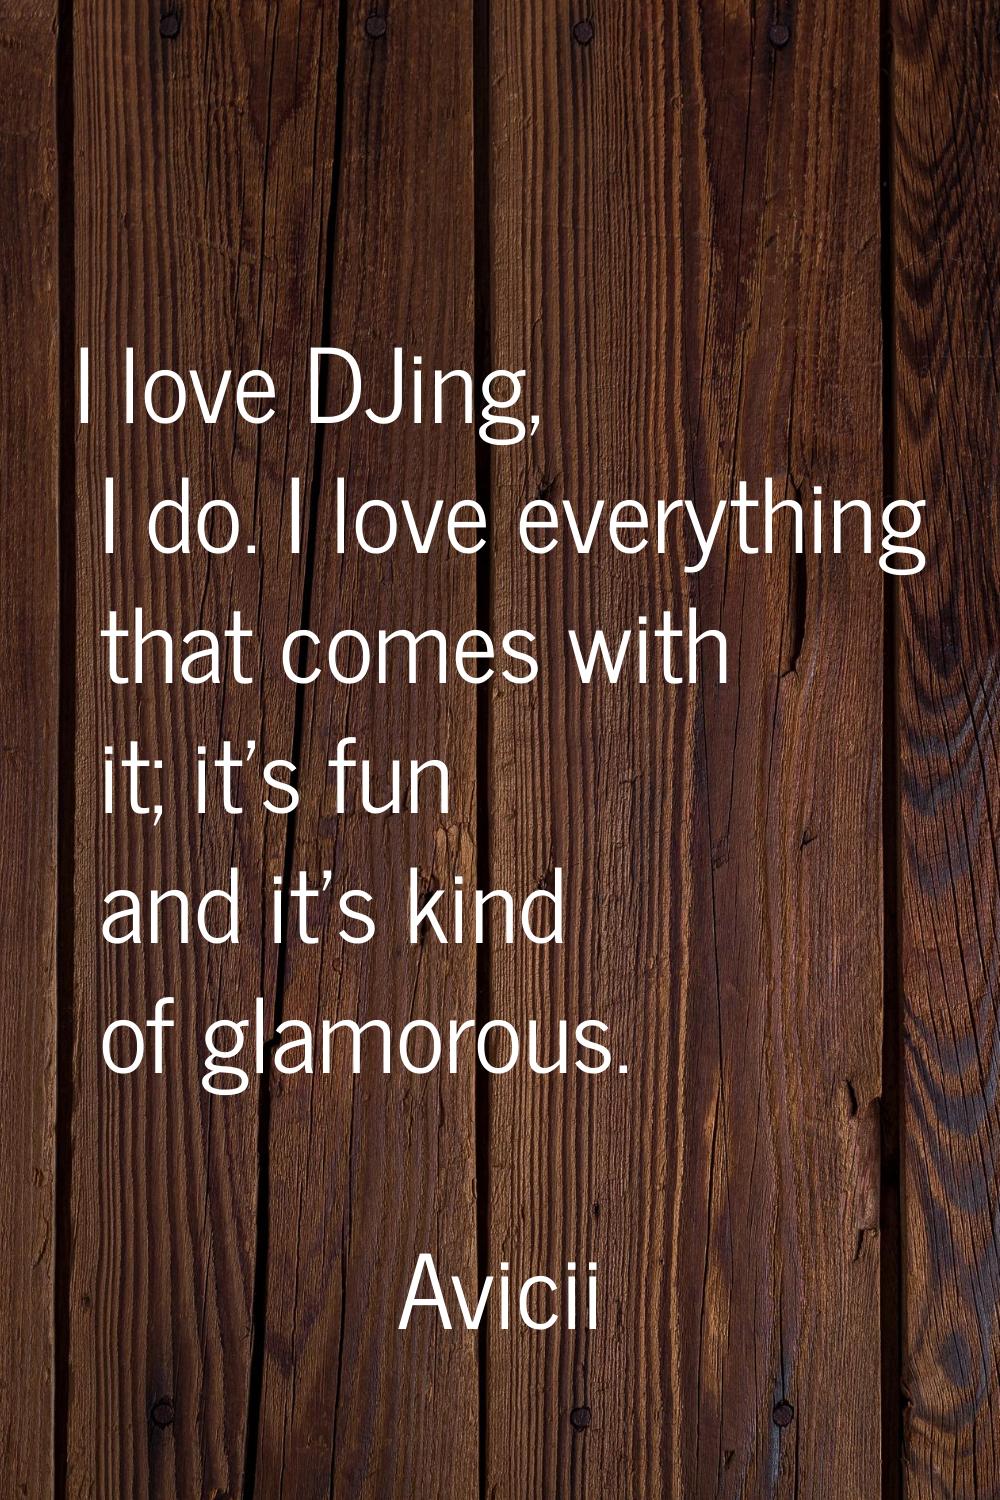 I love DJing, I do. I love everything that comes with it; it's fun and it's kind of glamorous.